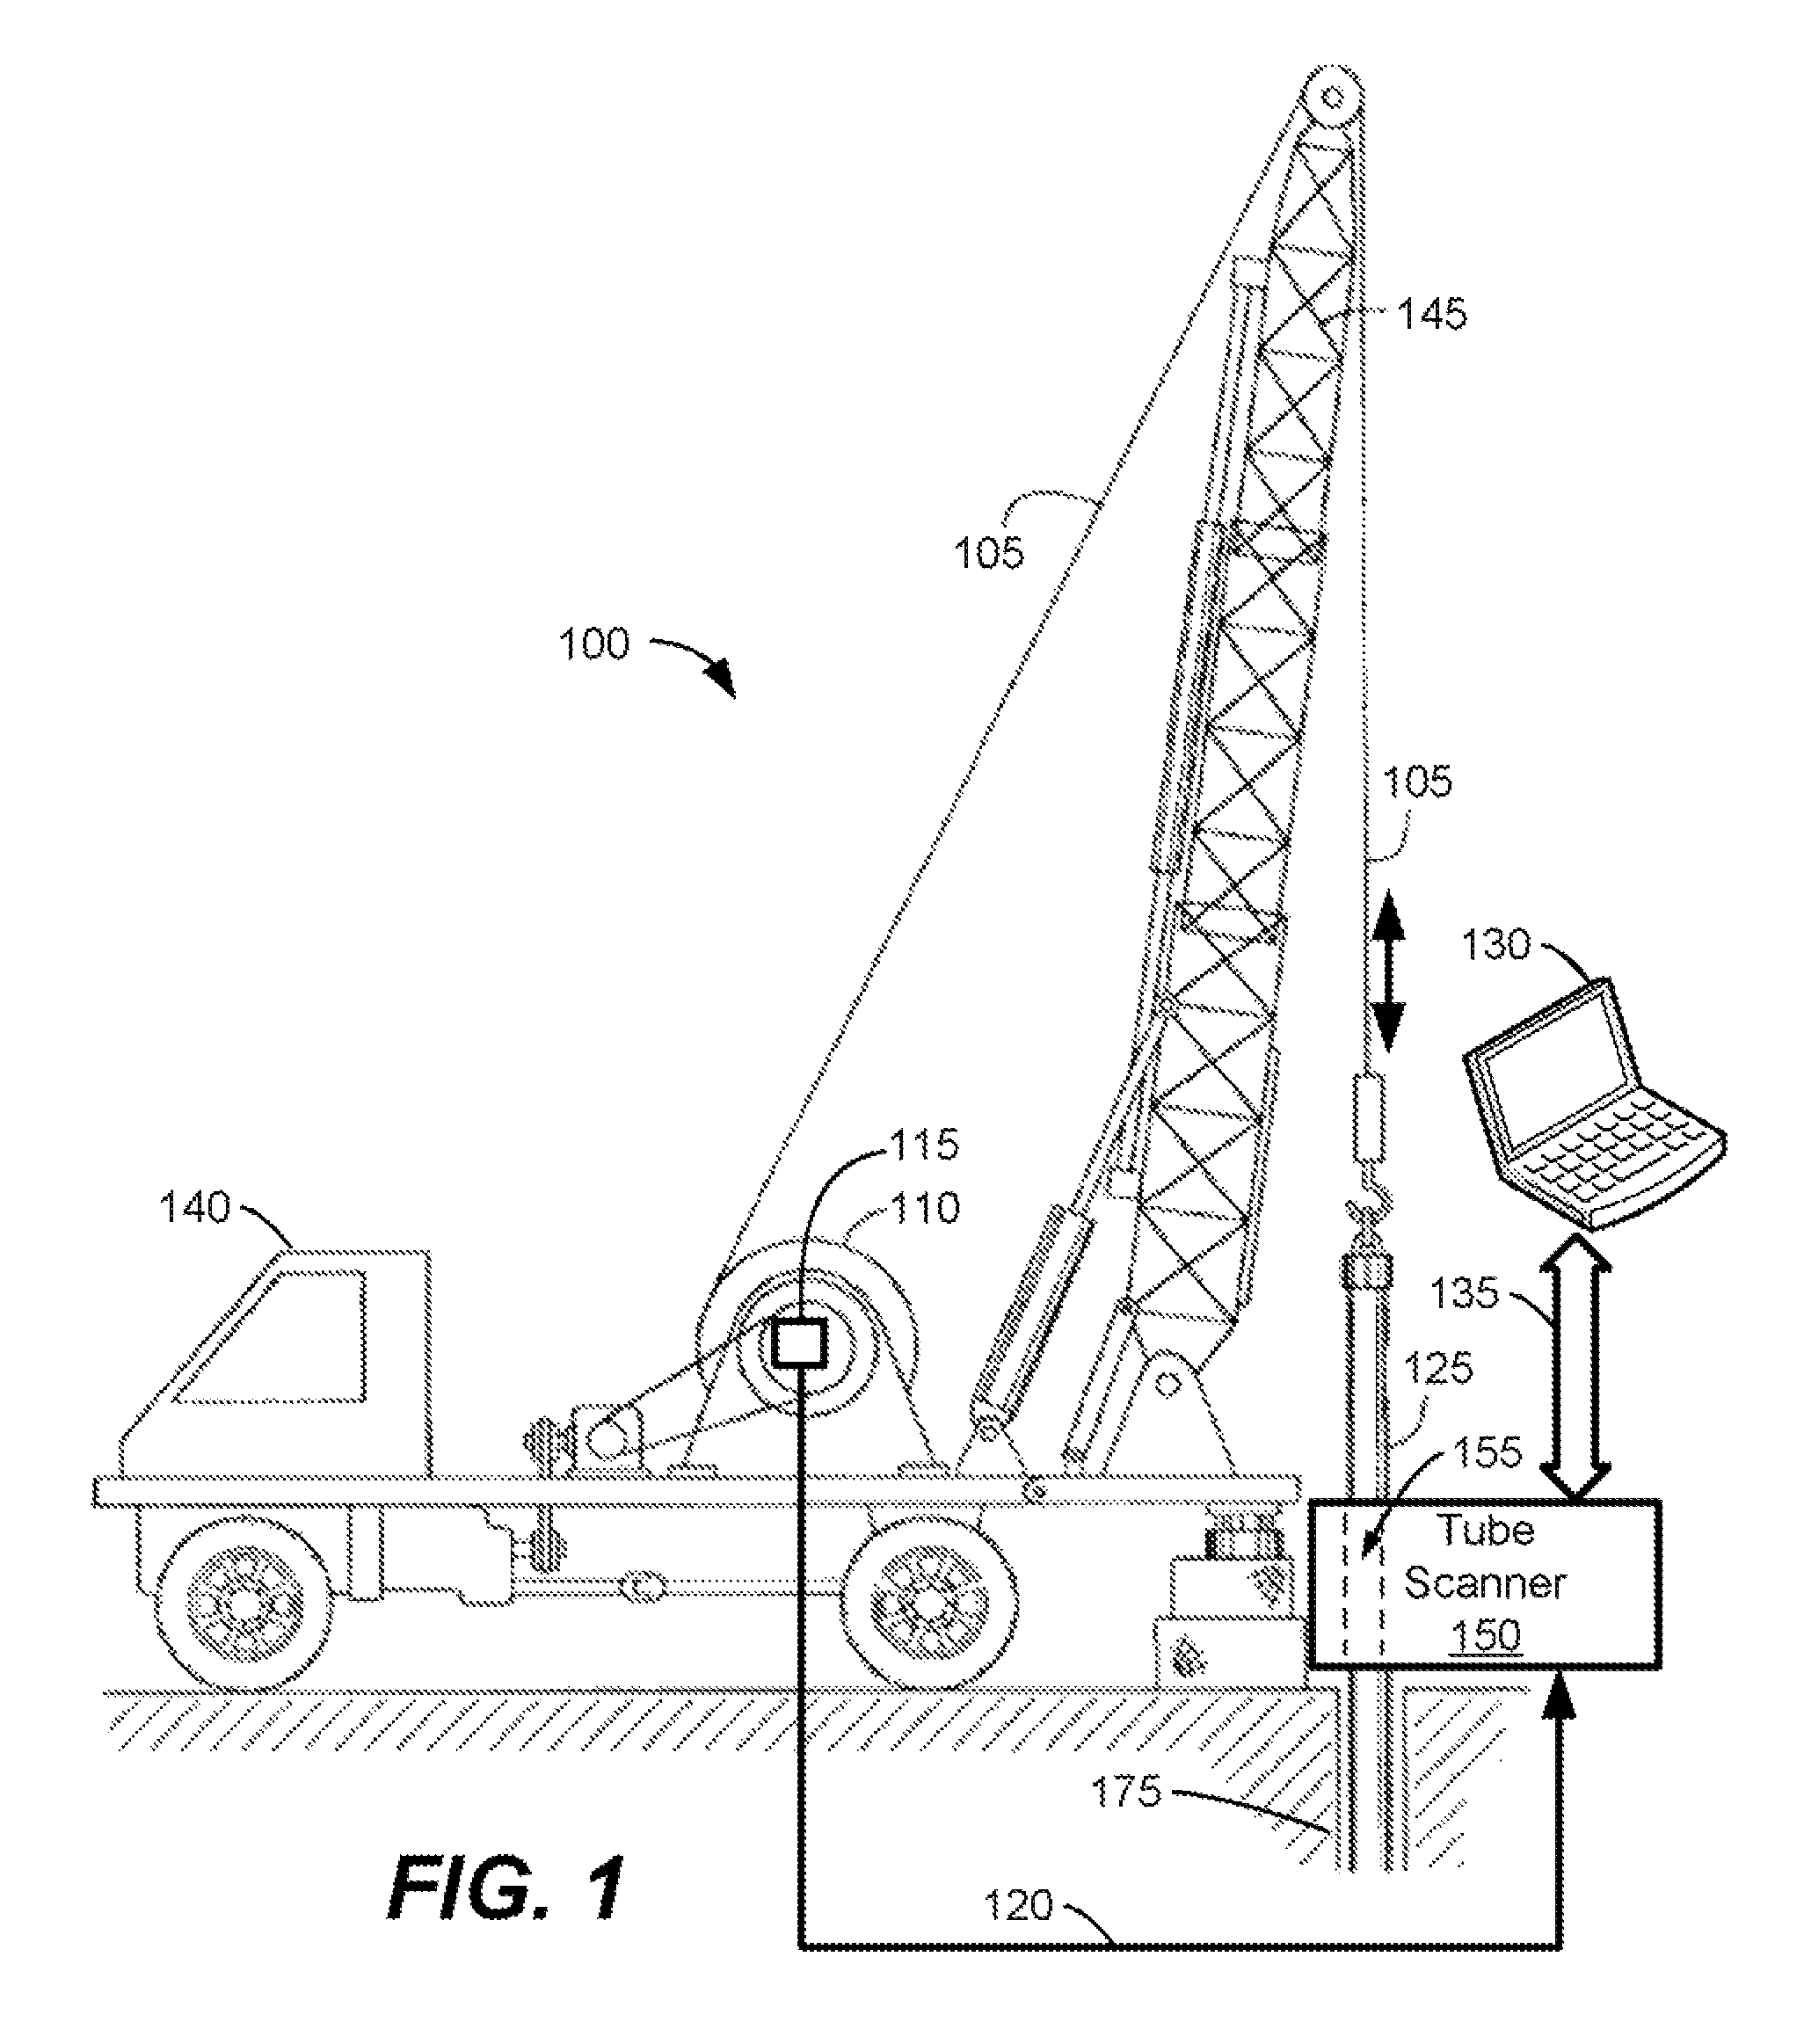 Method and system for calibrating a tube scanner